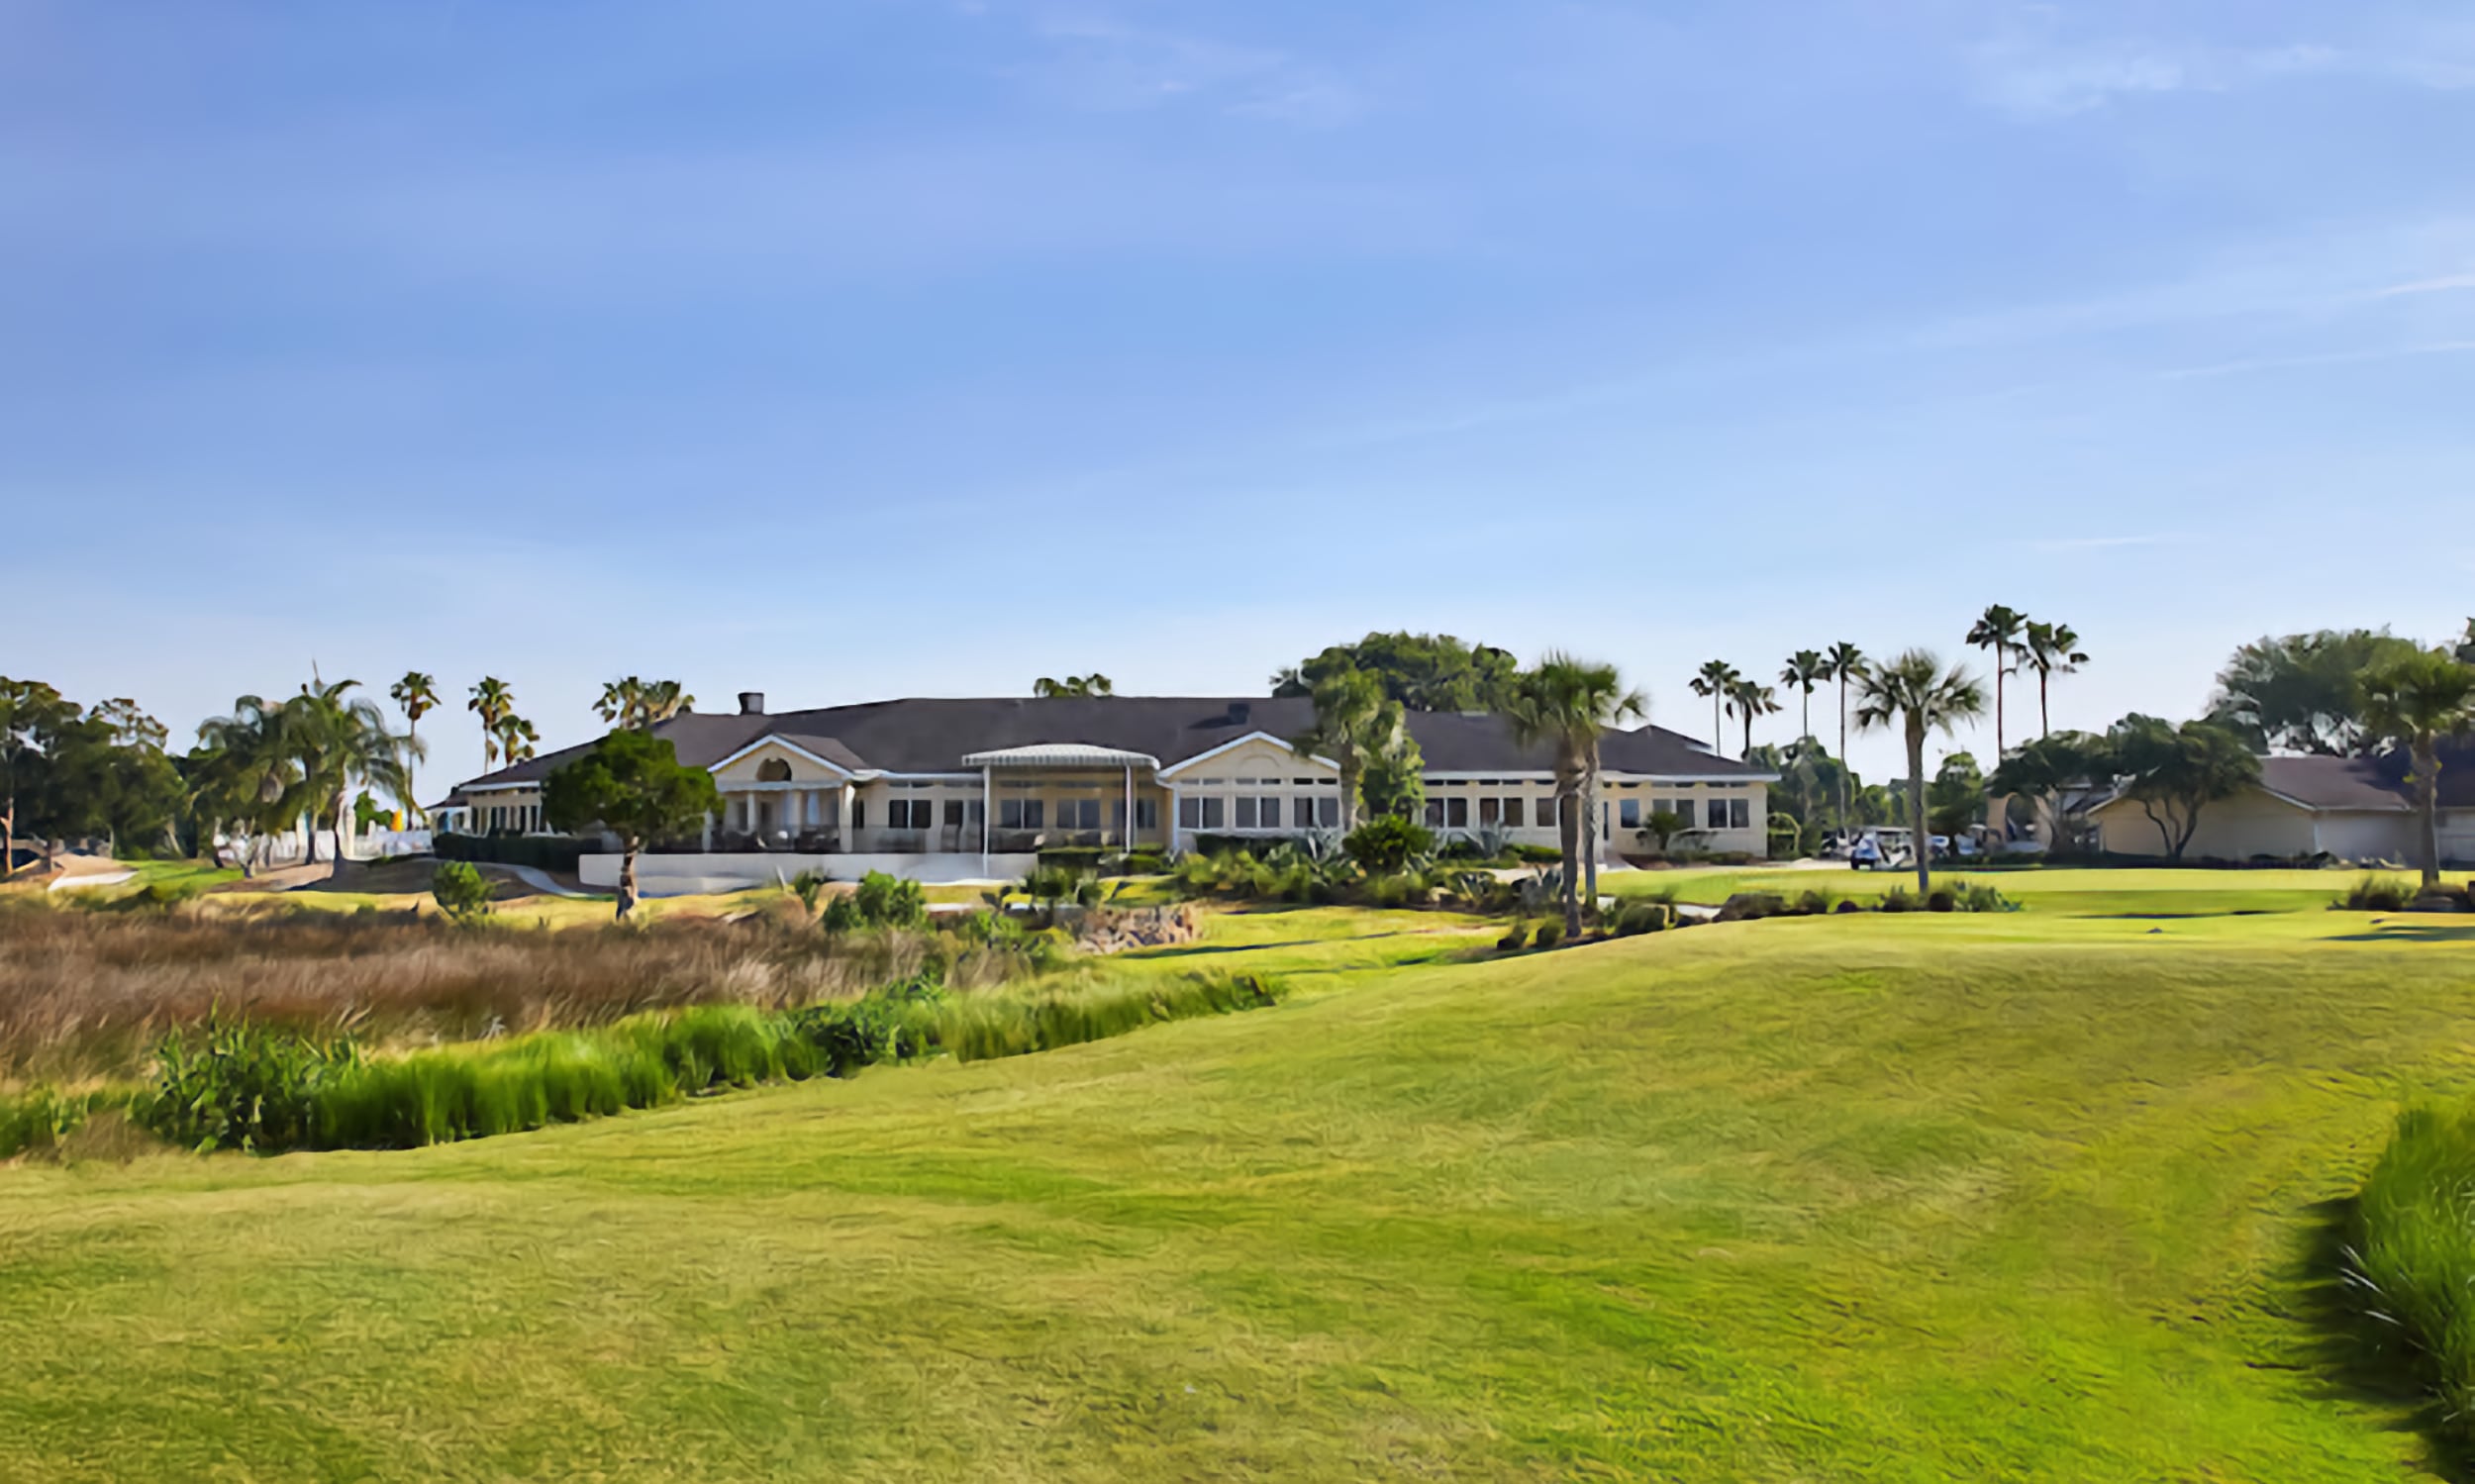 Marsh Creek Country Club's clubhouse stands amidst palm trees, overlooking the rolling green fairway